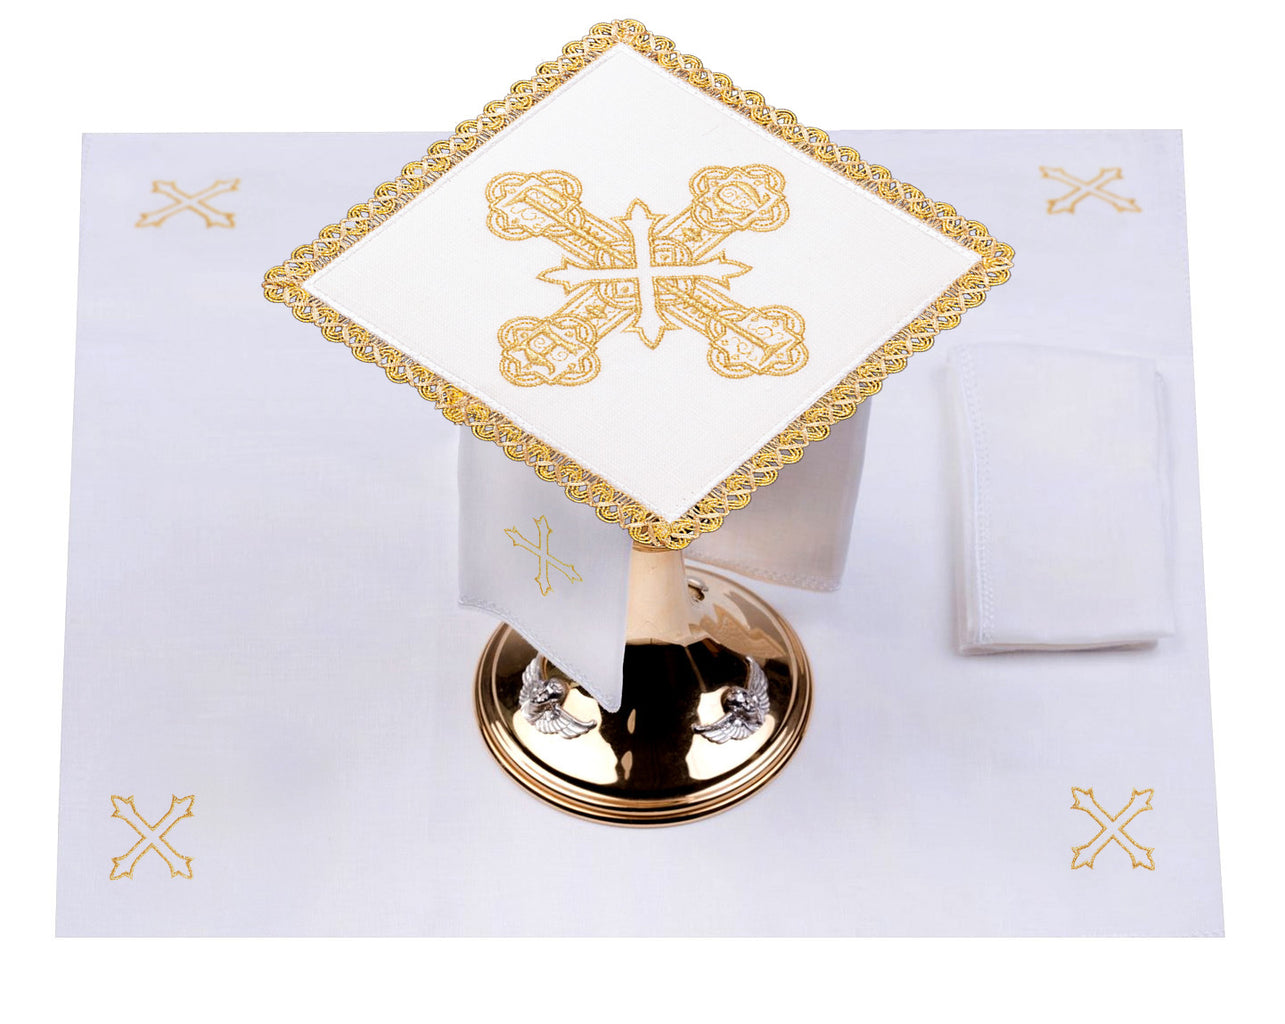 Chalice Linen with Palka with a cross